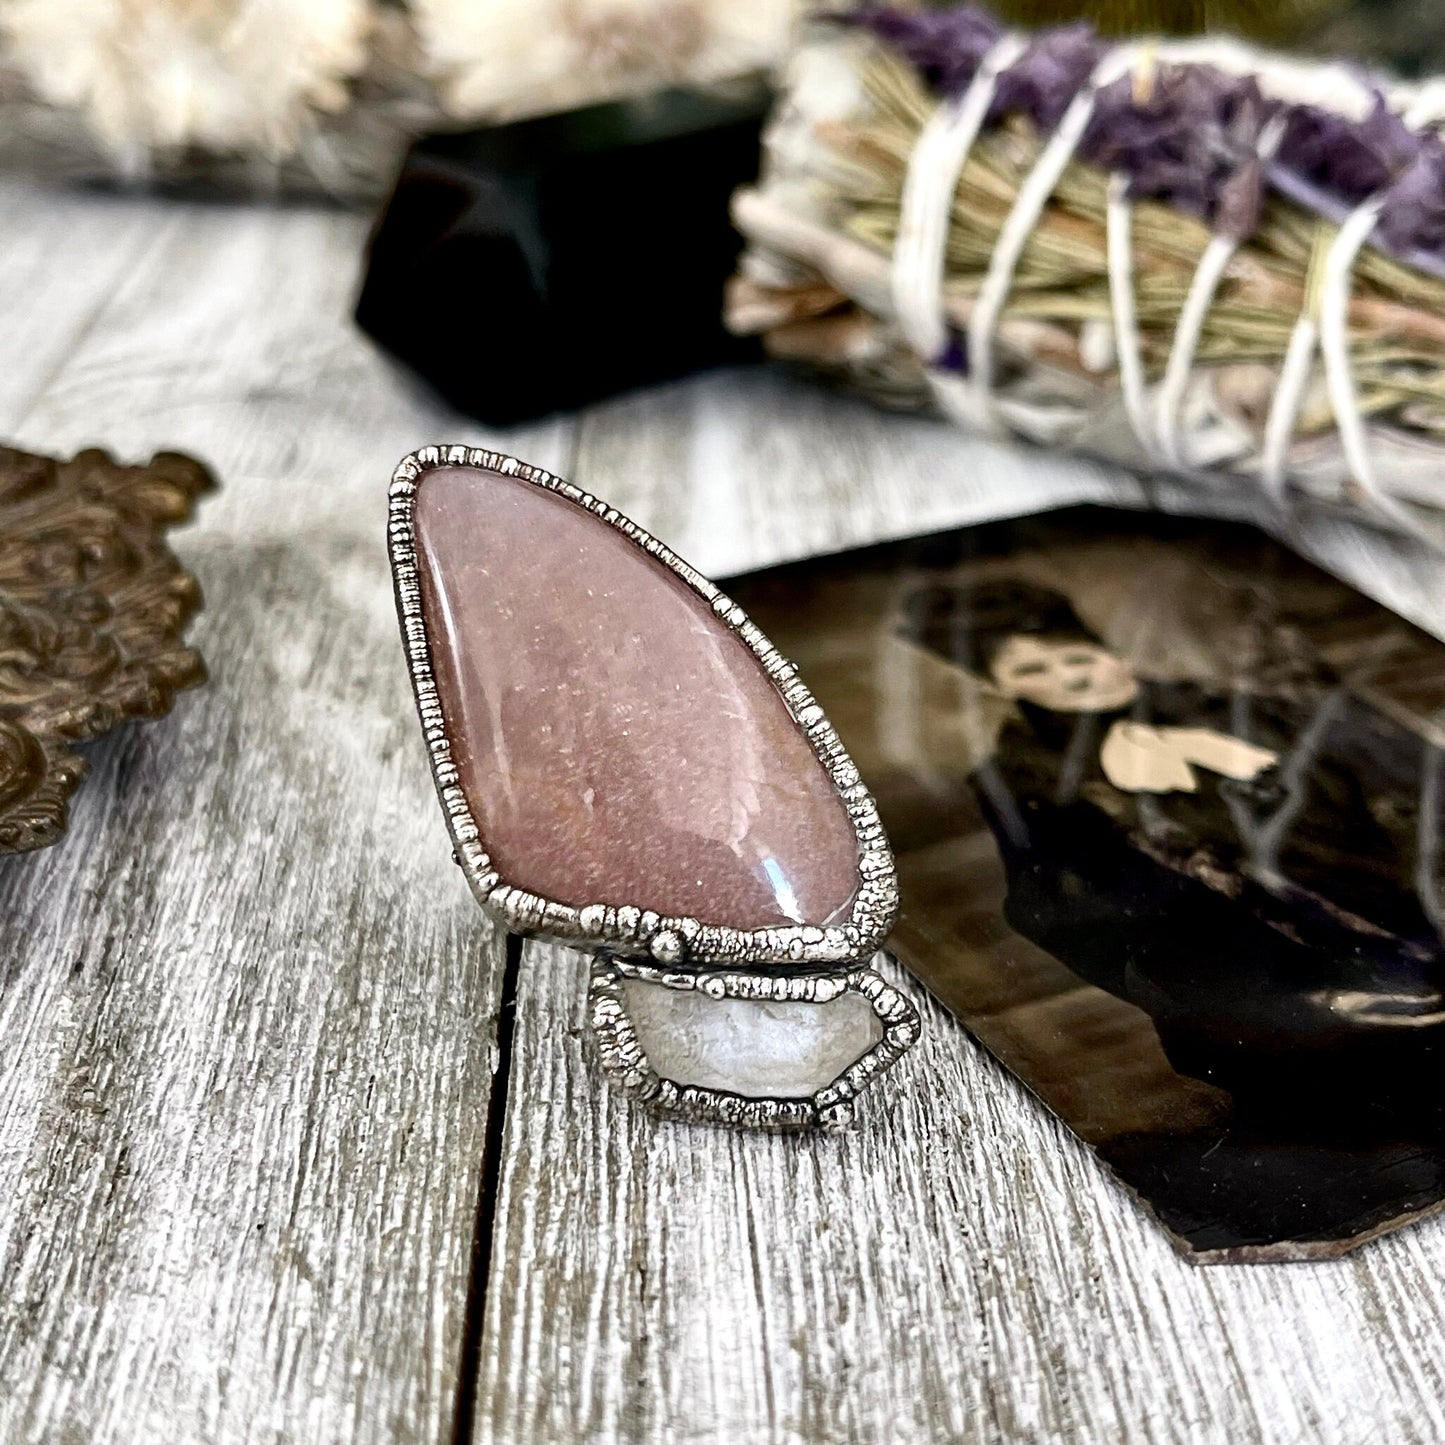 Size 8 Two Stone Ring- Peach Moonstone Clear Quartz Crystal Ring Fine Silver / Foxlark Collection - One of a Kind / Statement Jewelry